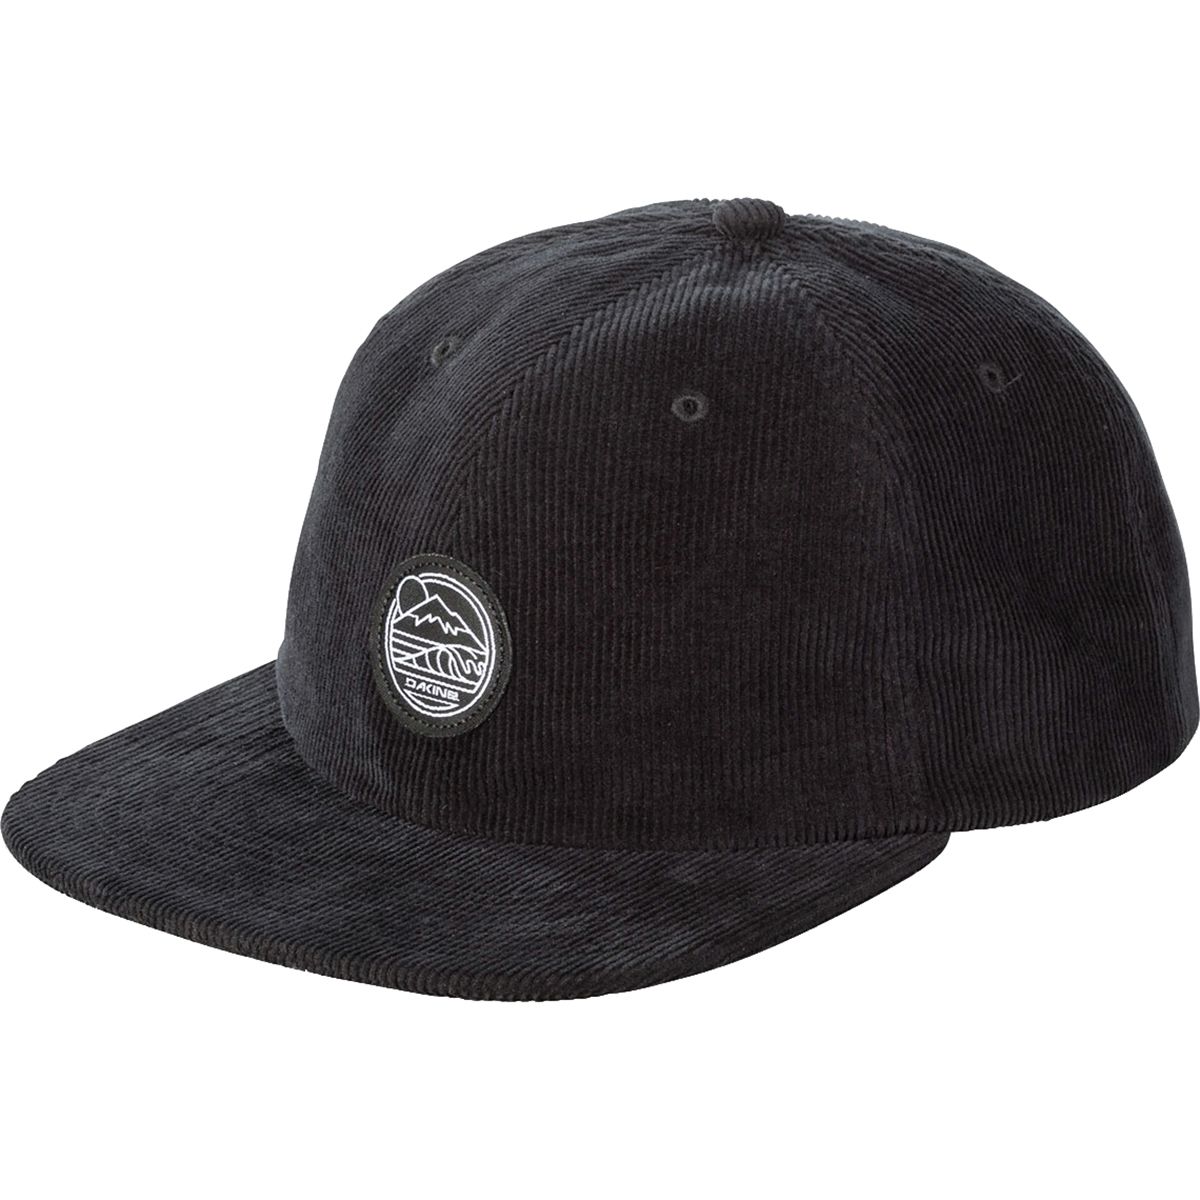 DAKINE Well Rounded Hat - Men's - Accessories